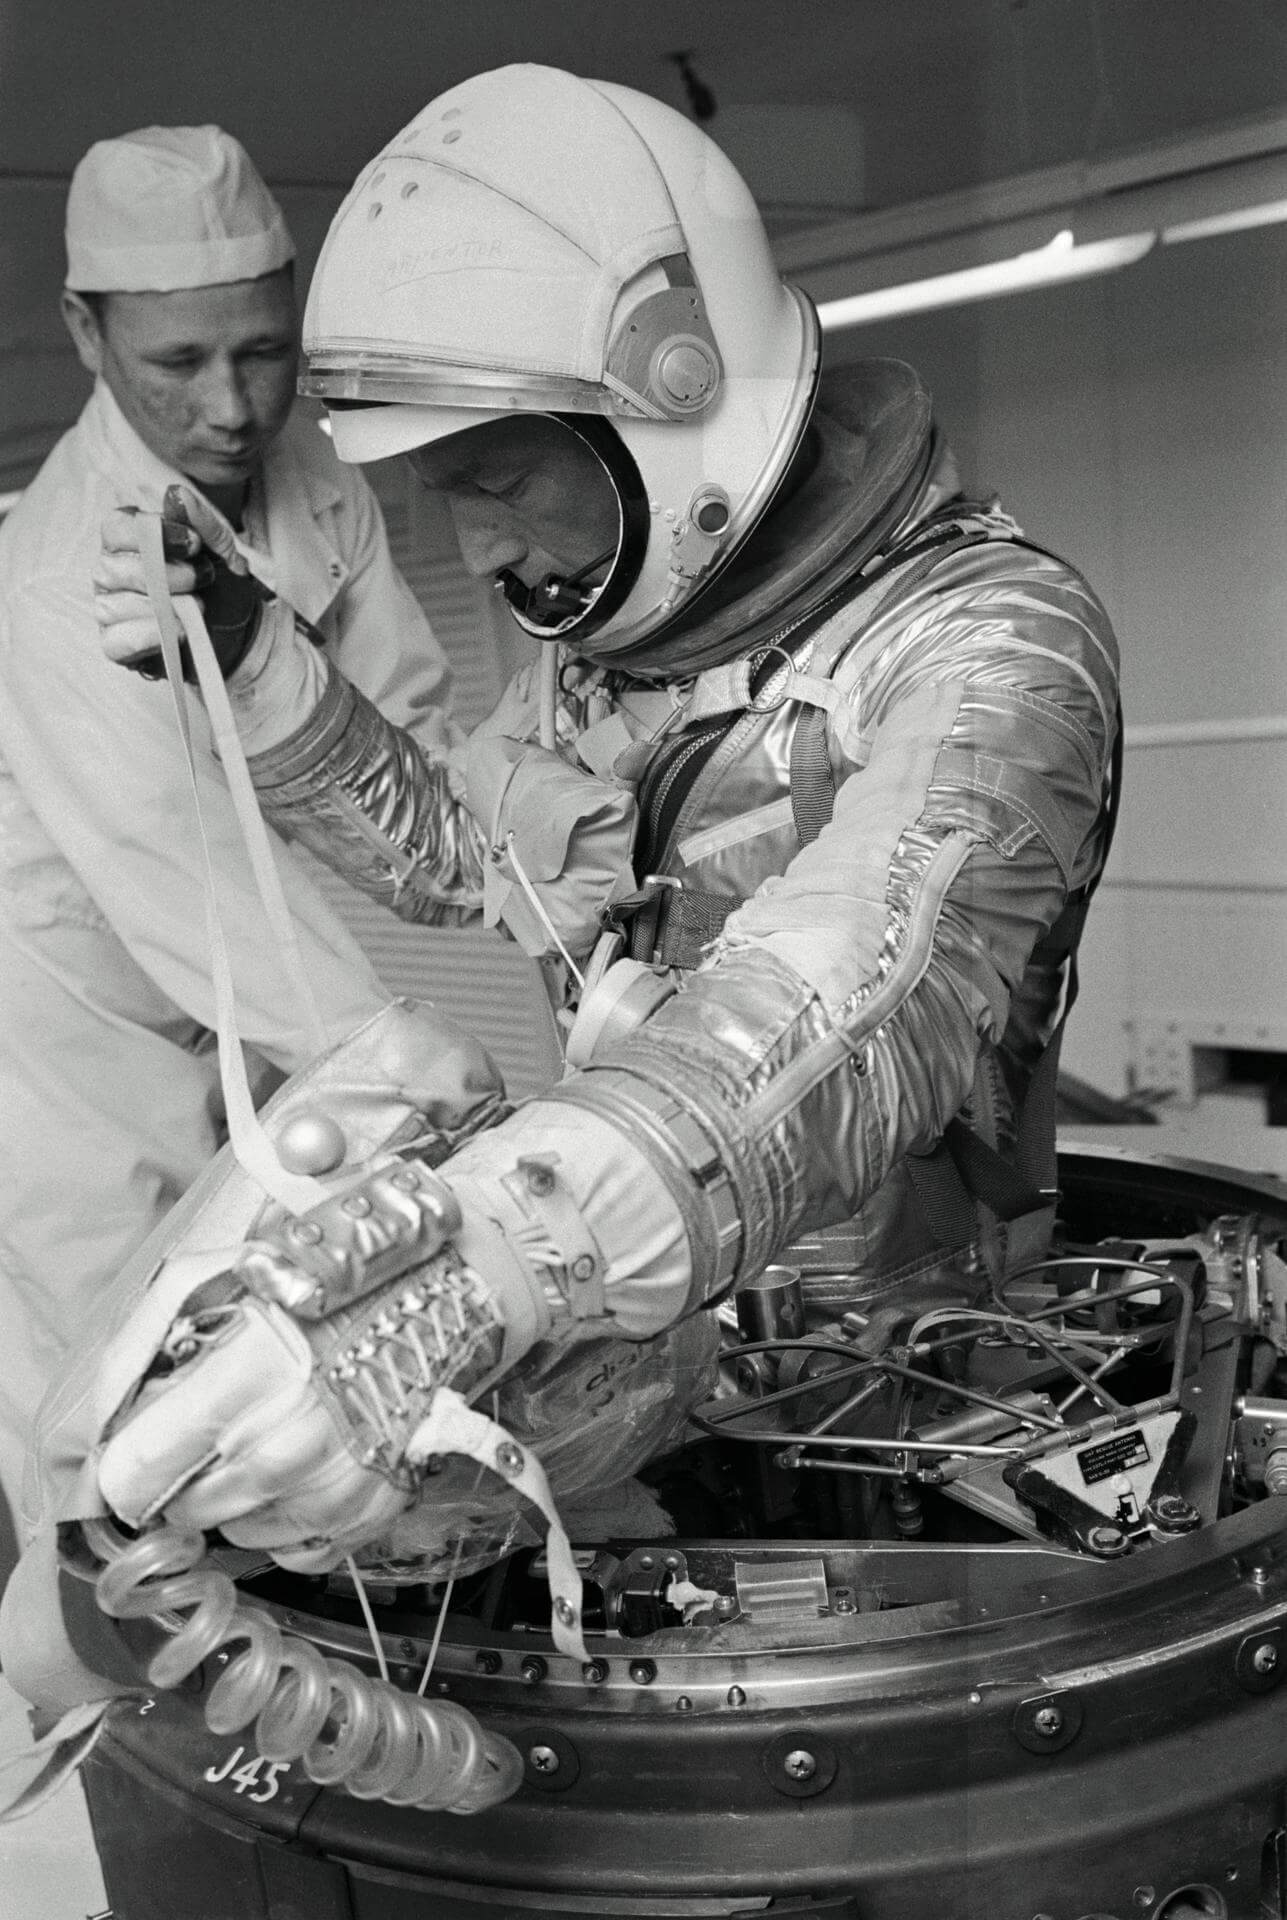 Image of an Astronaut and the ground team doing some tests